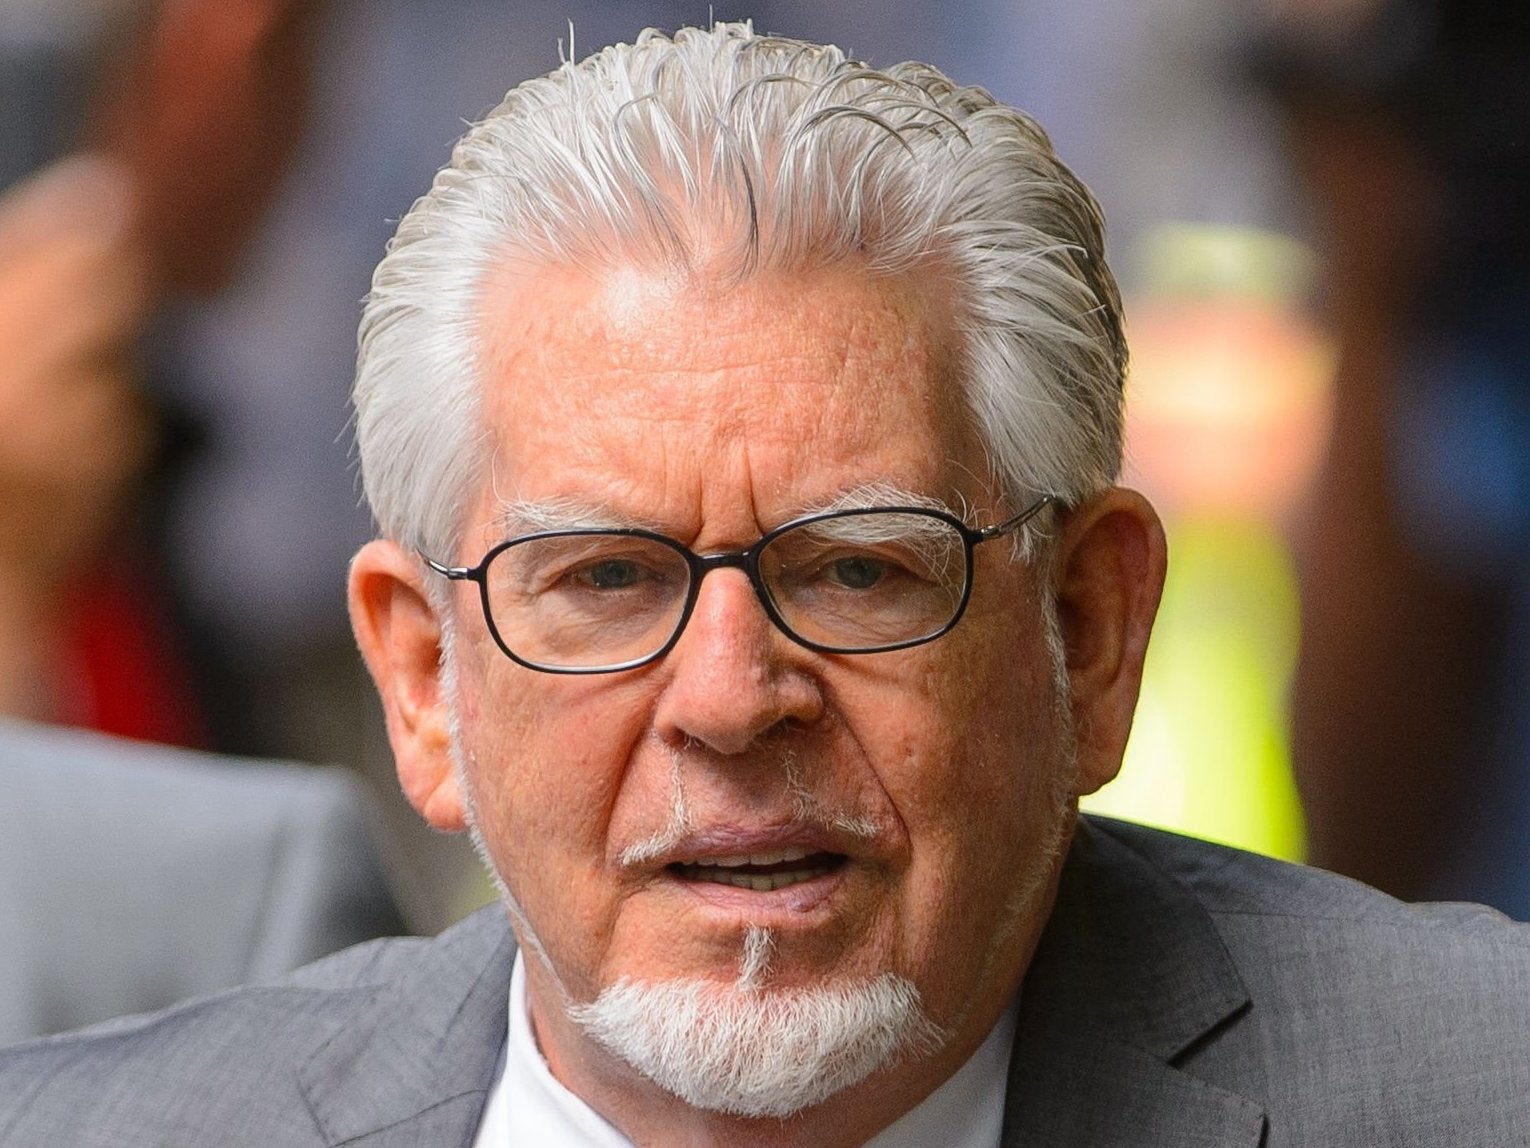 Rolf Harris Convicted Paedophile Pictured In School Grounds Waving At Children The Independent The Independent - crown rolf robux robux codes 2019 live